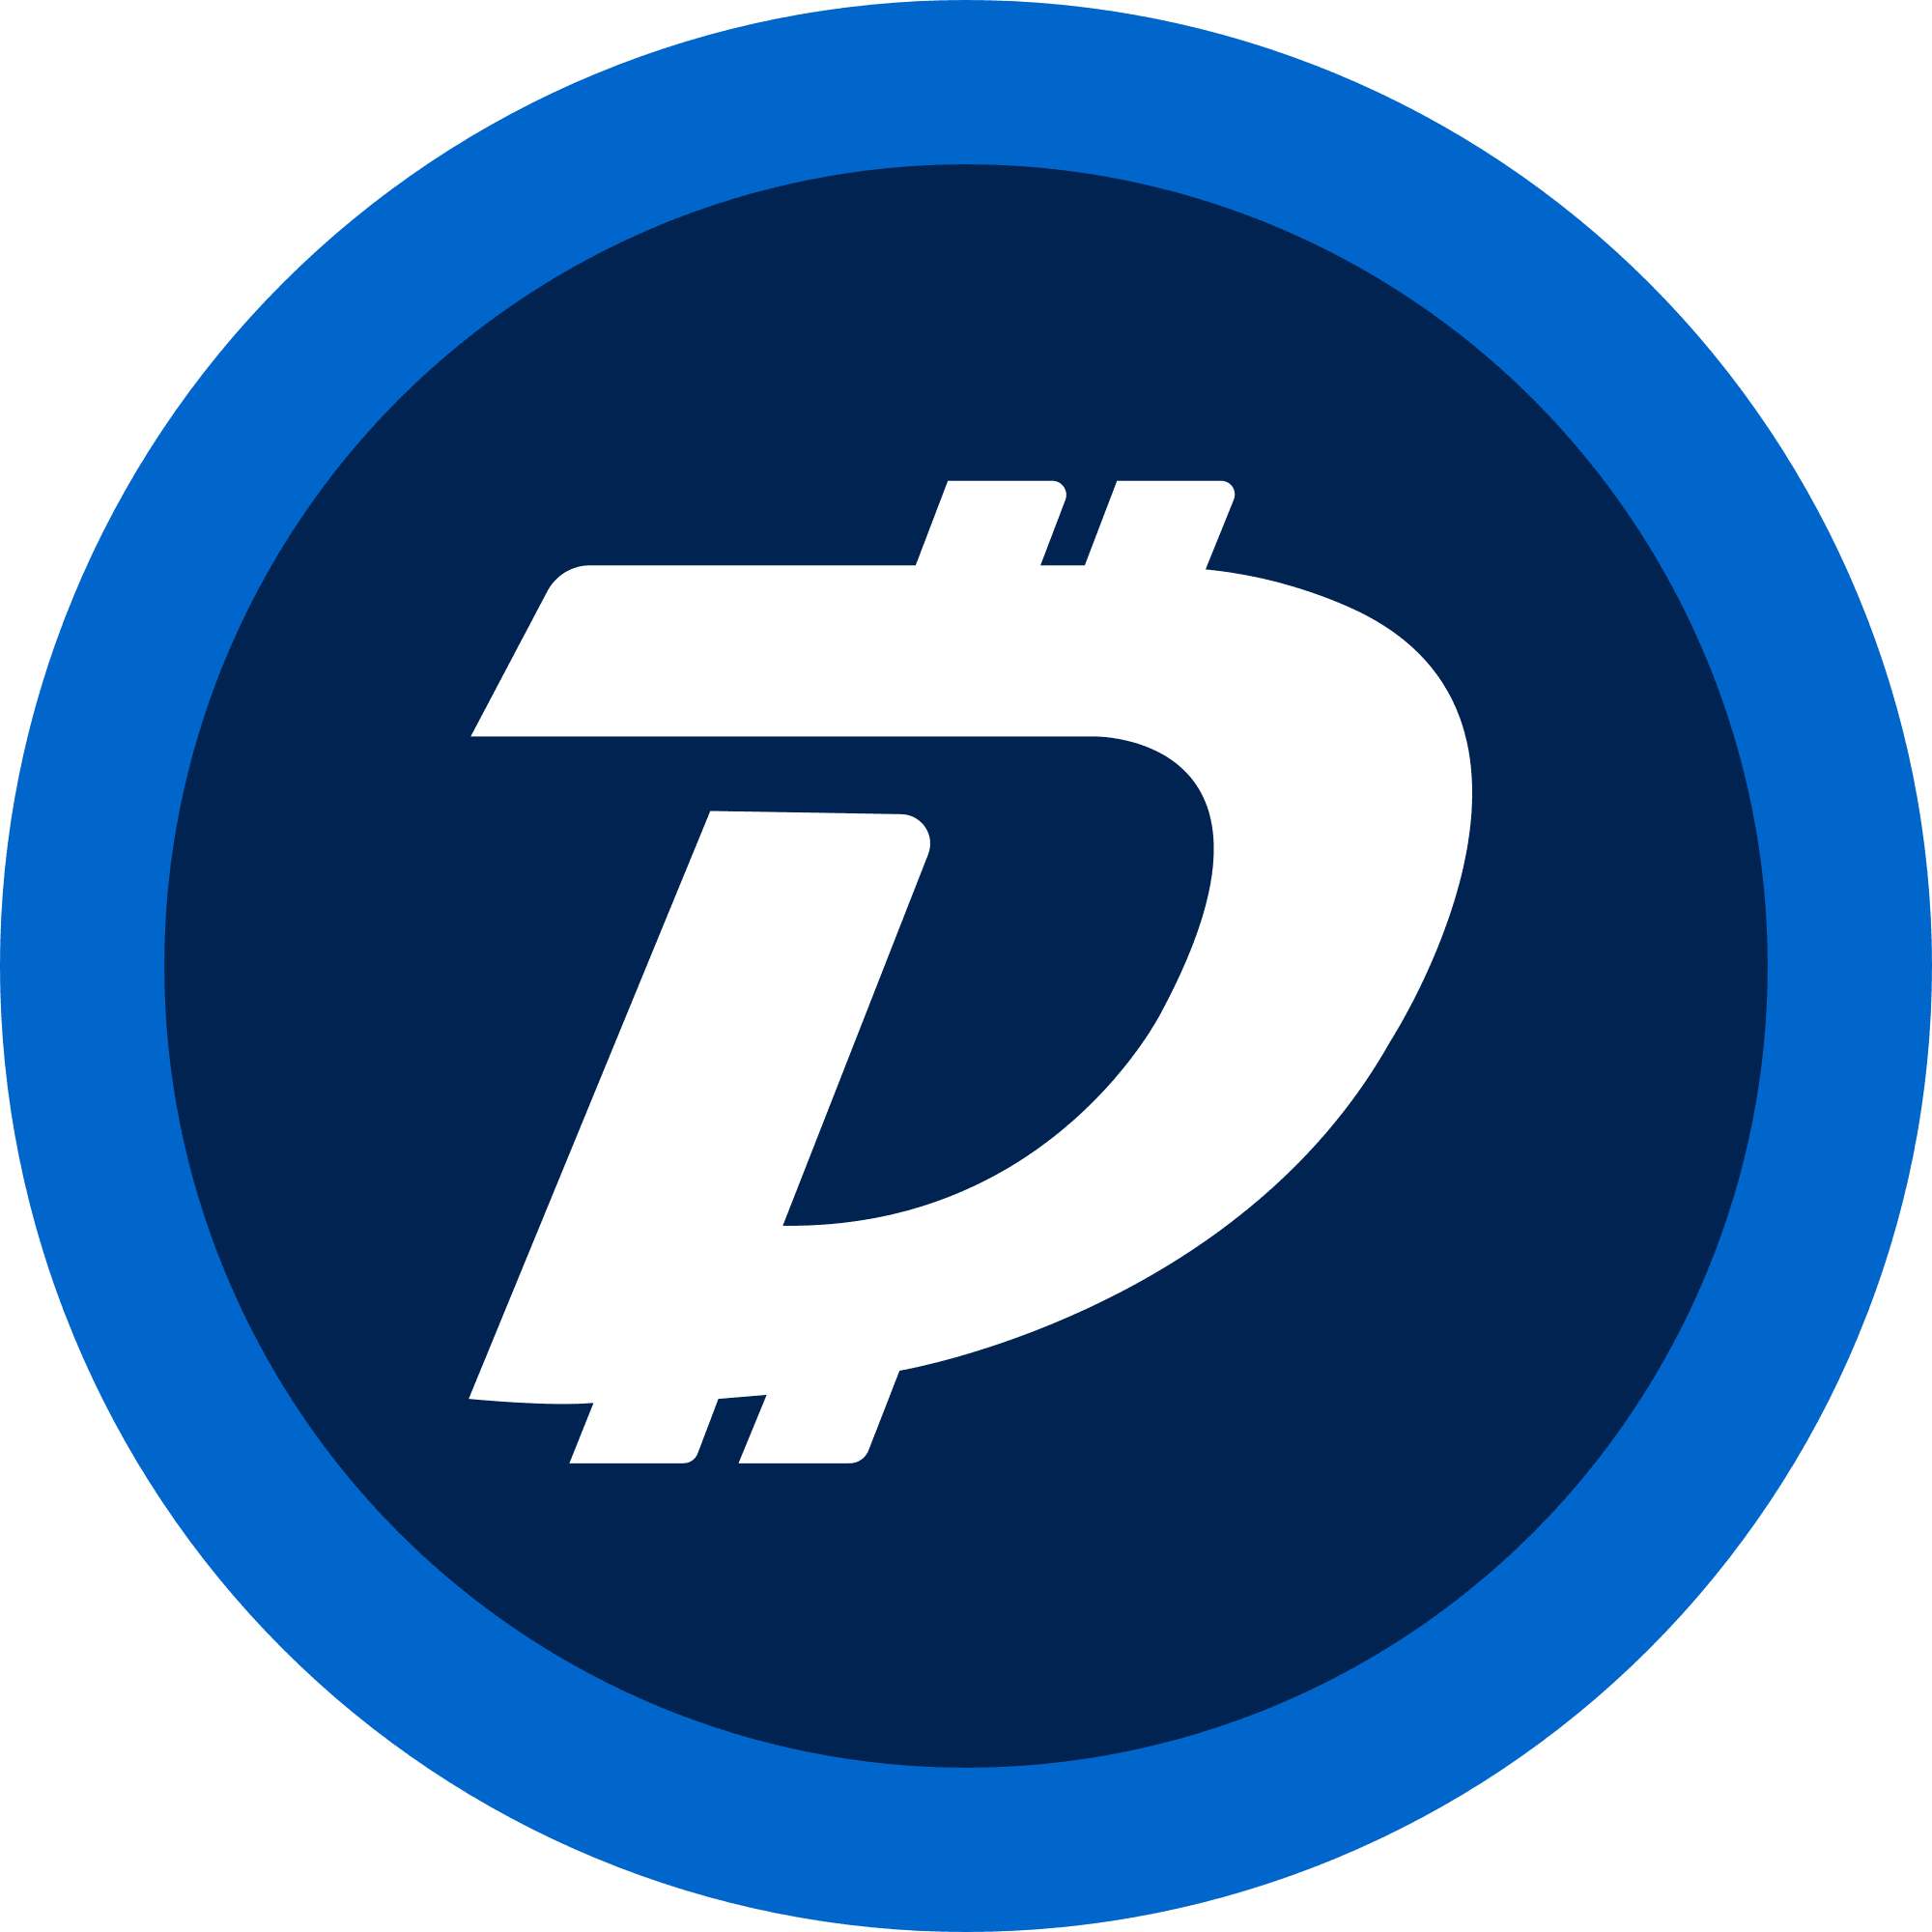 DigiByte logo in png format